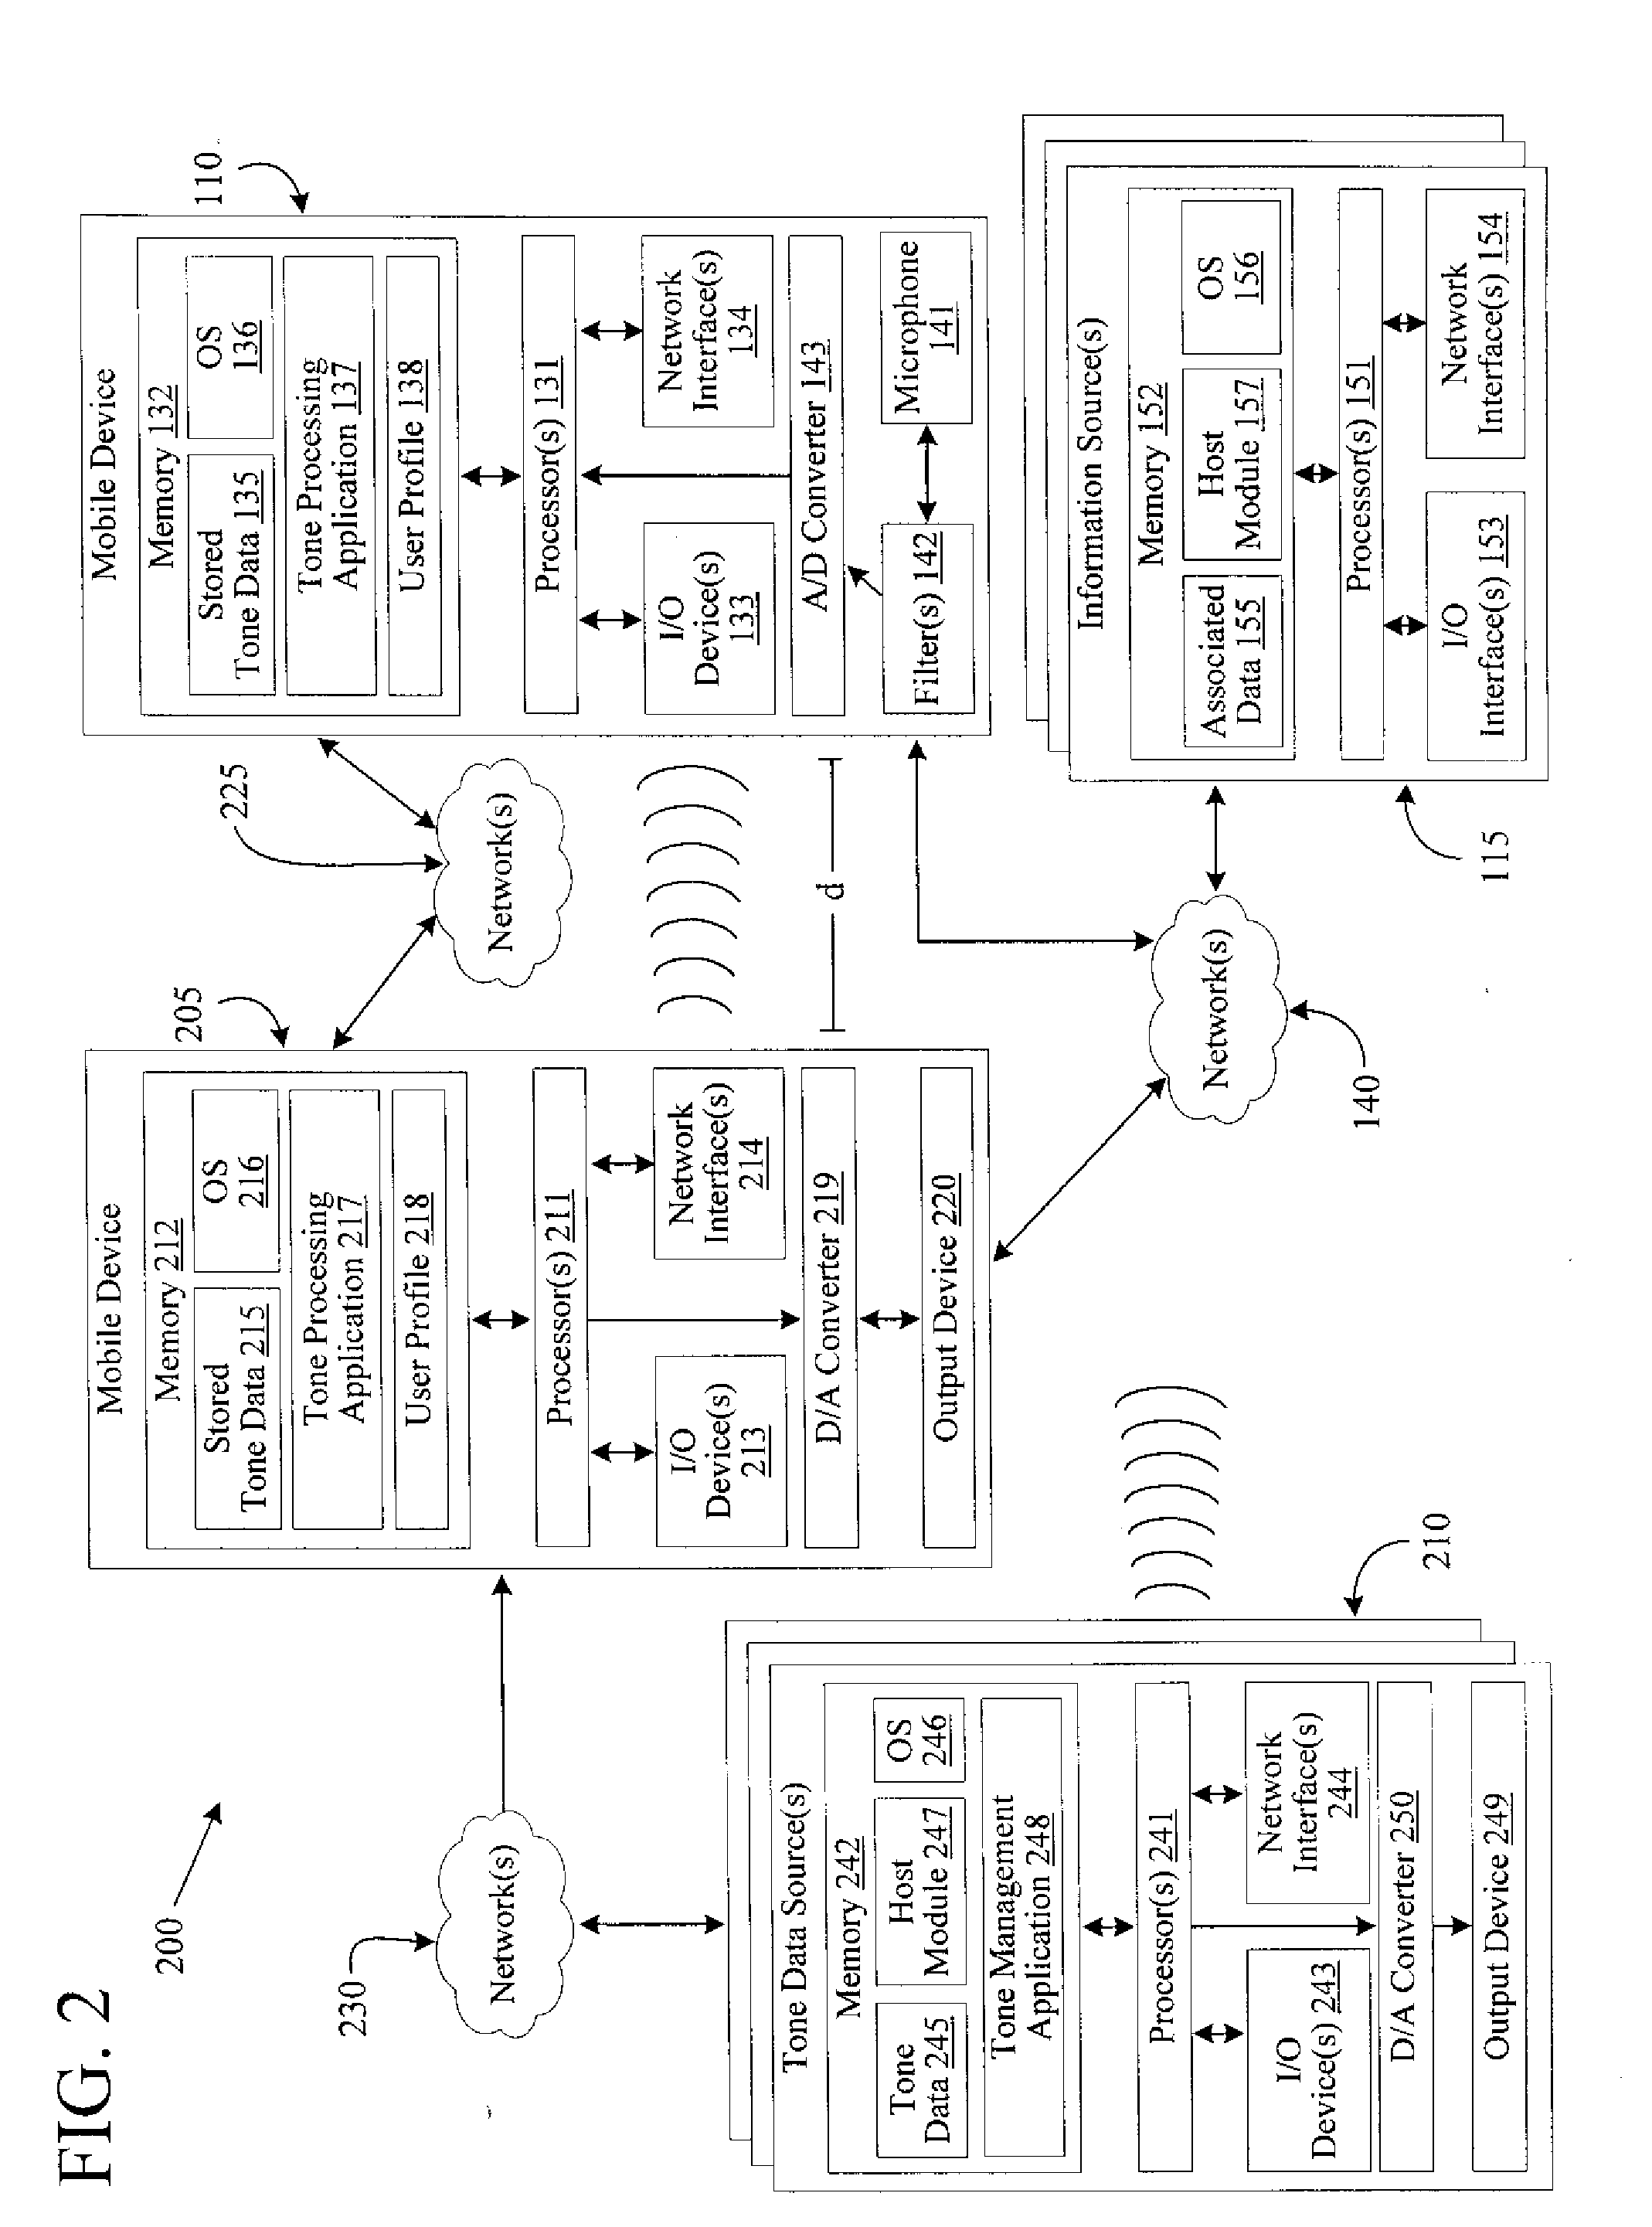 Systems, methods and apparatus for facilitating communication between mobile devices